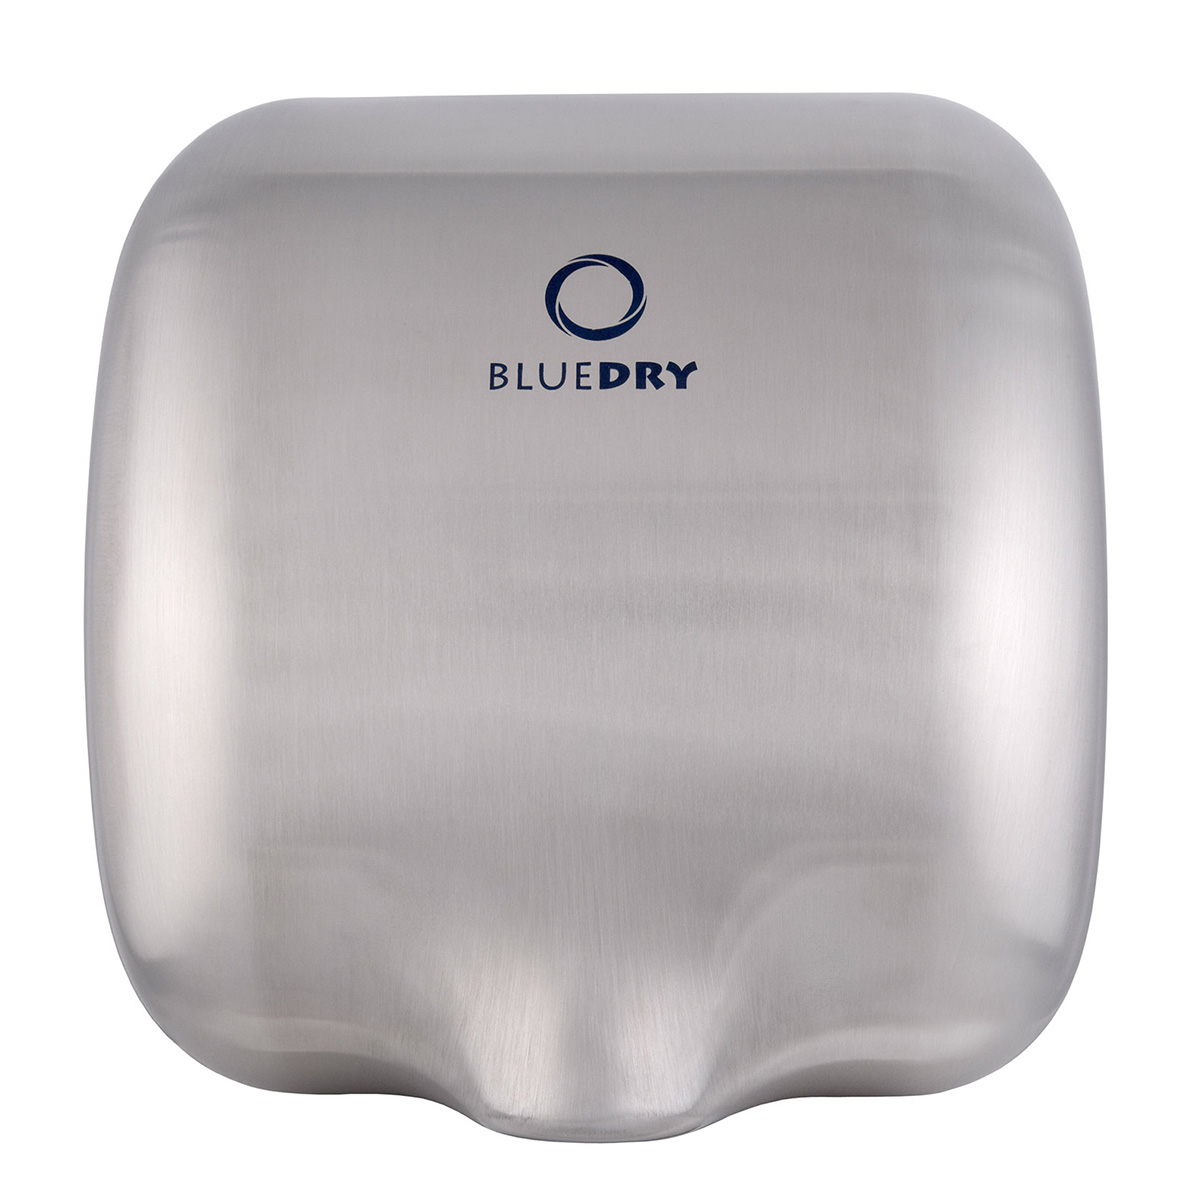 BLUEDRY ECO Dry Commercial Hand Dryer Durable Automatic High Speed Handdrier Polished Stainless 